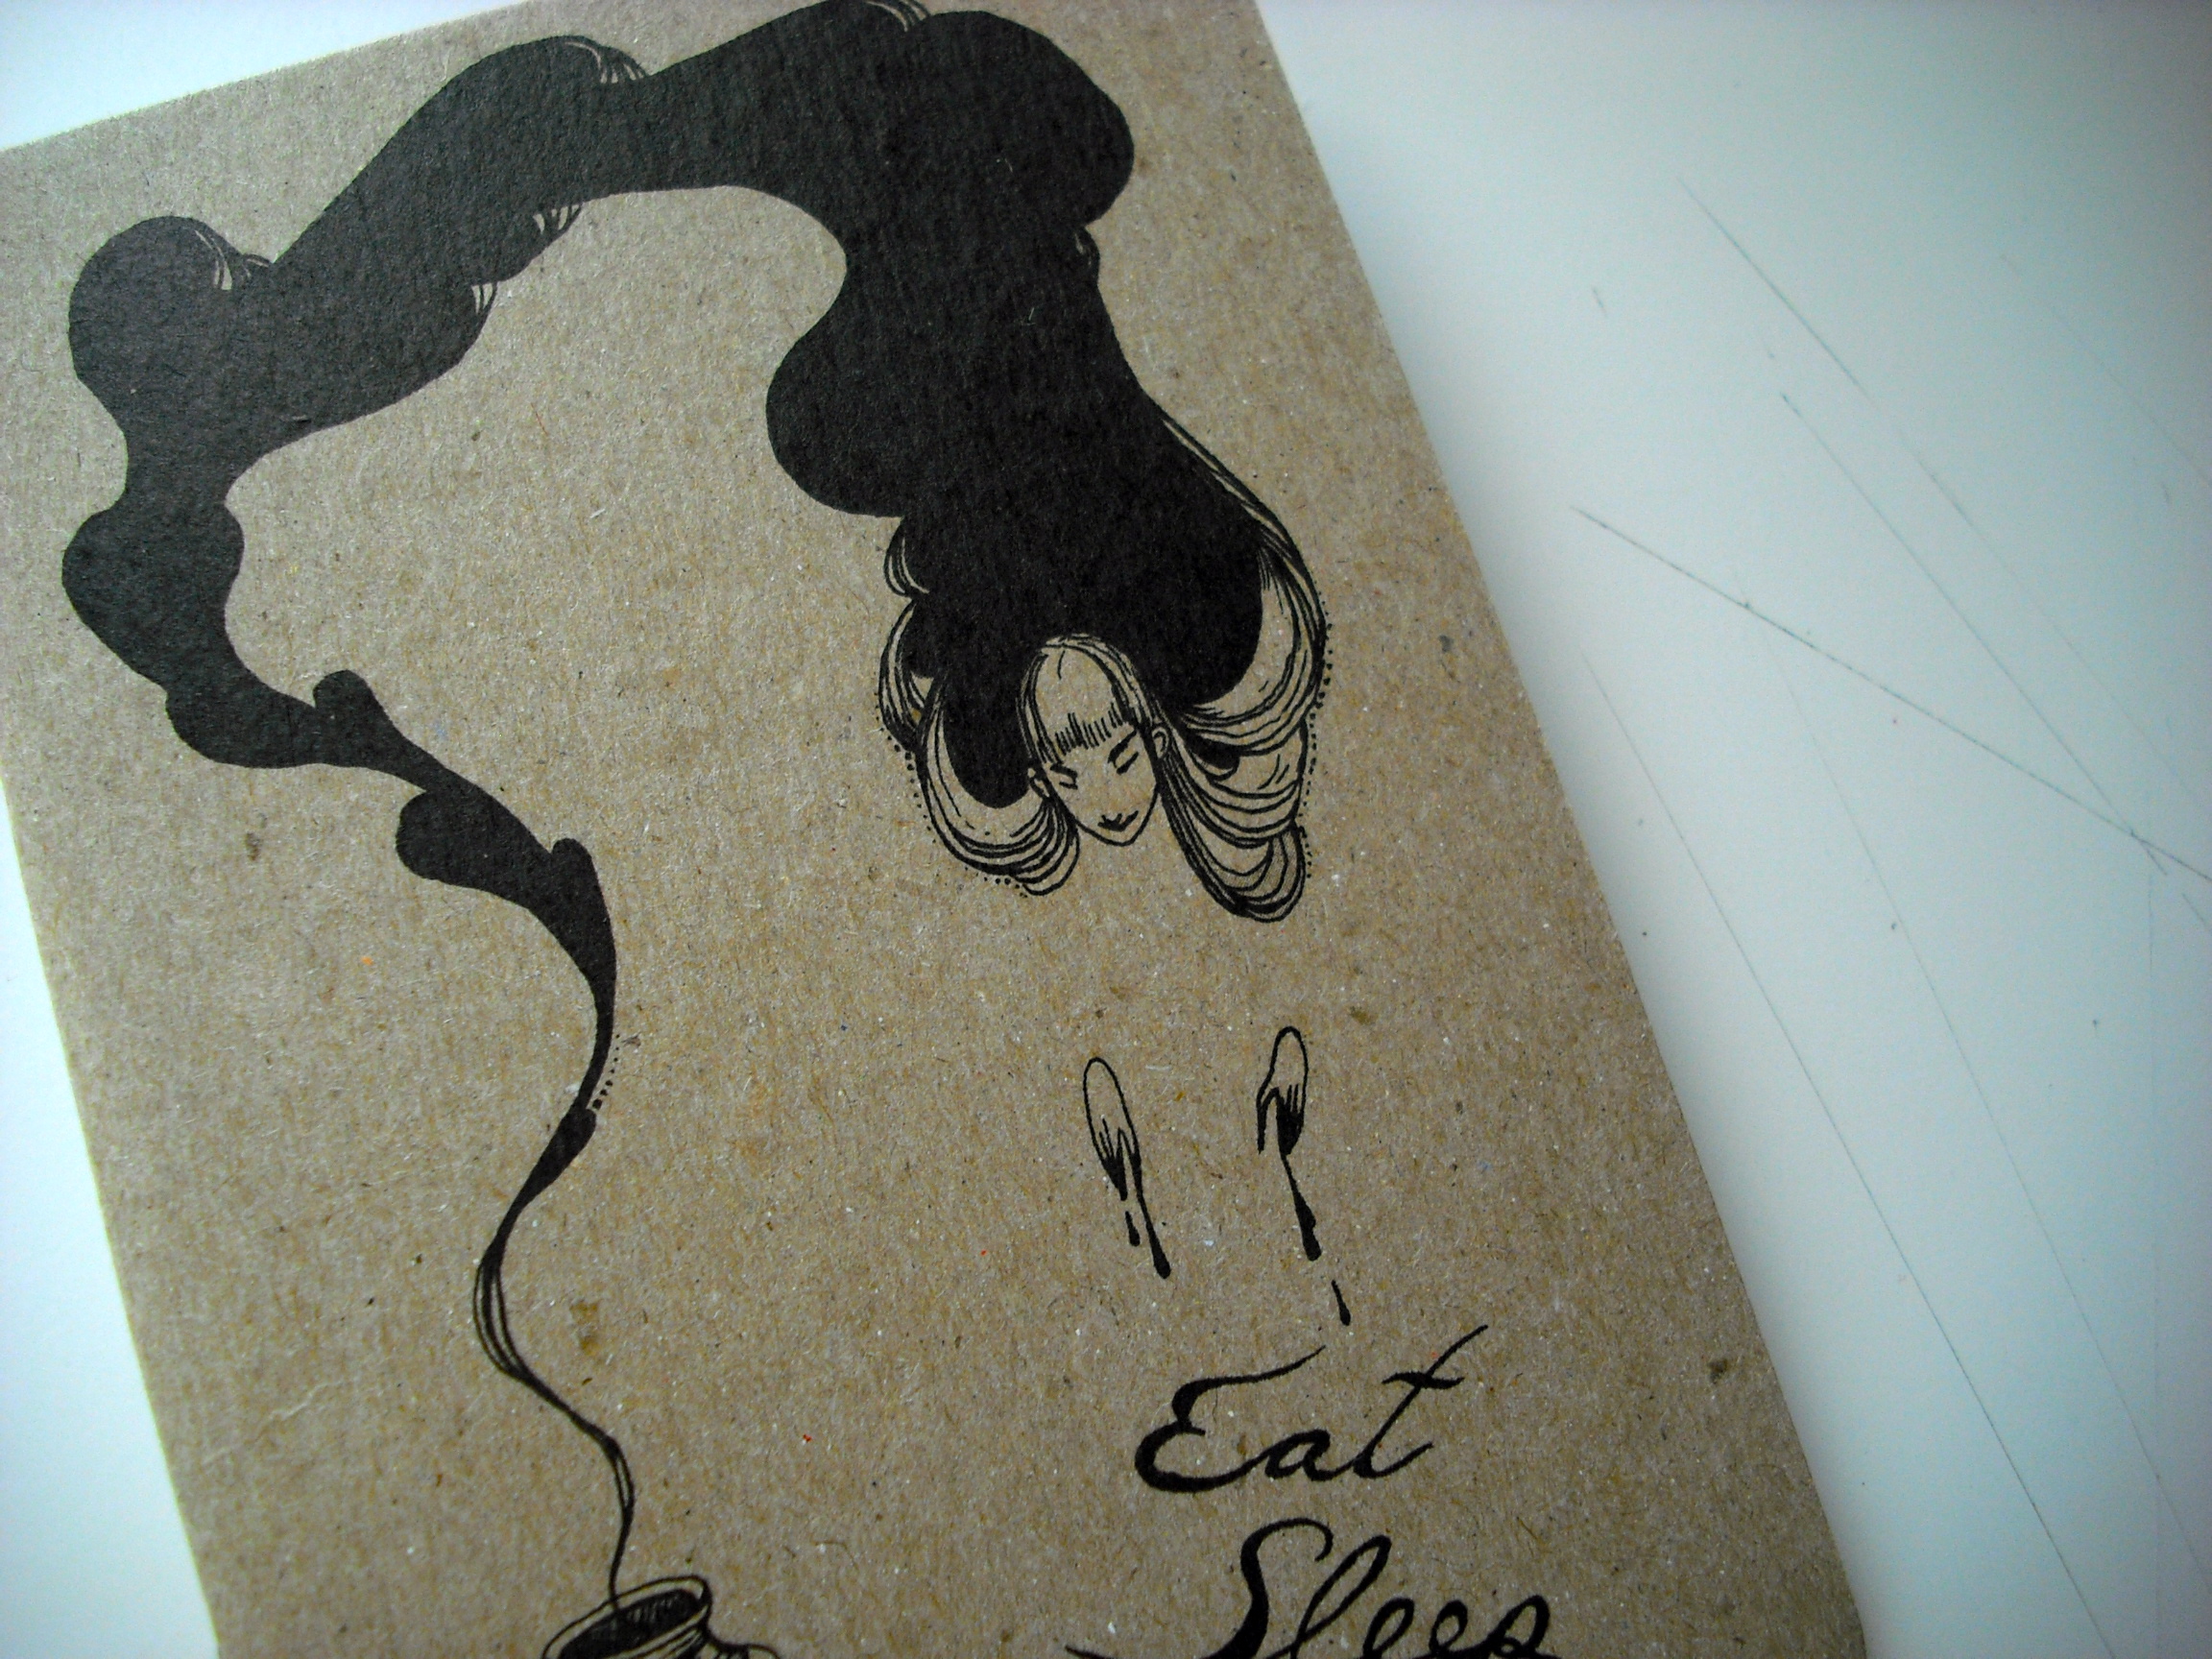 Eat Sleep Draw limited edition notebook